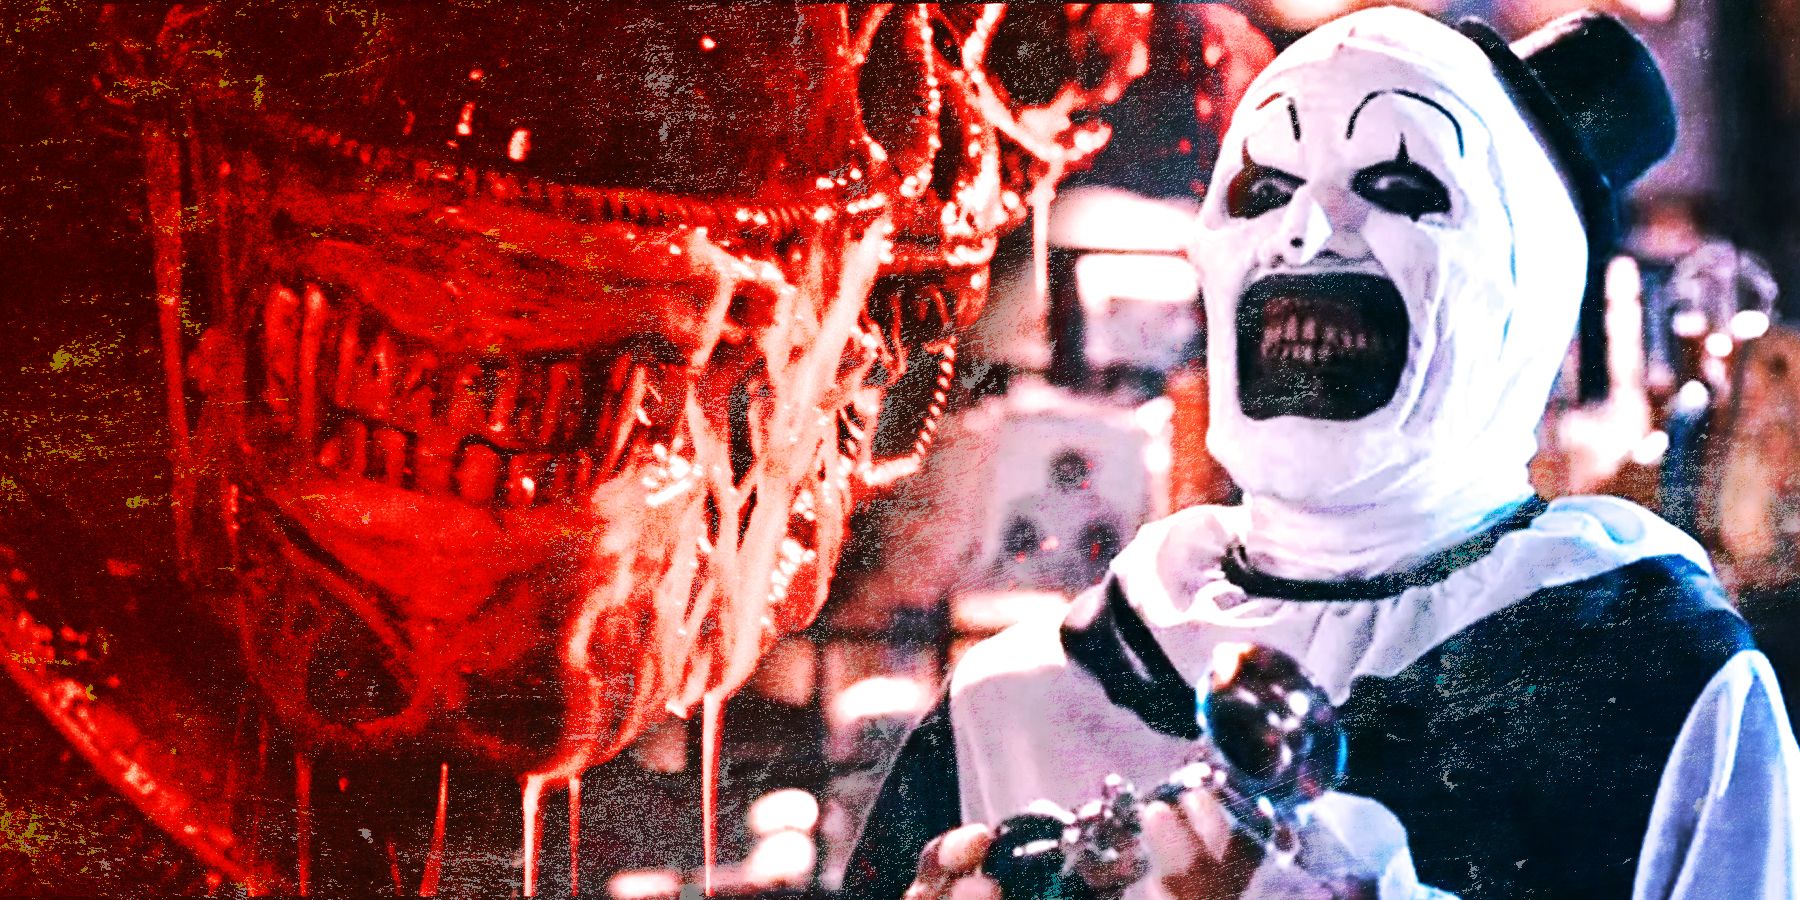 Terrifier 2 Is the Slasher Equivalent to James Cameron's Aliens